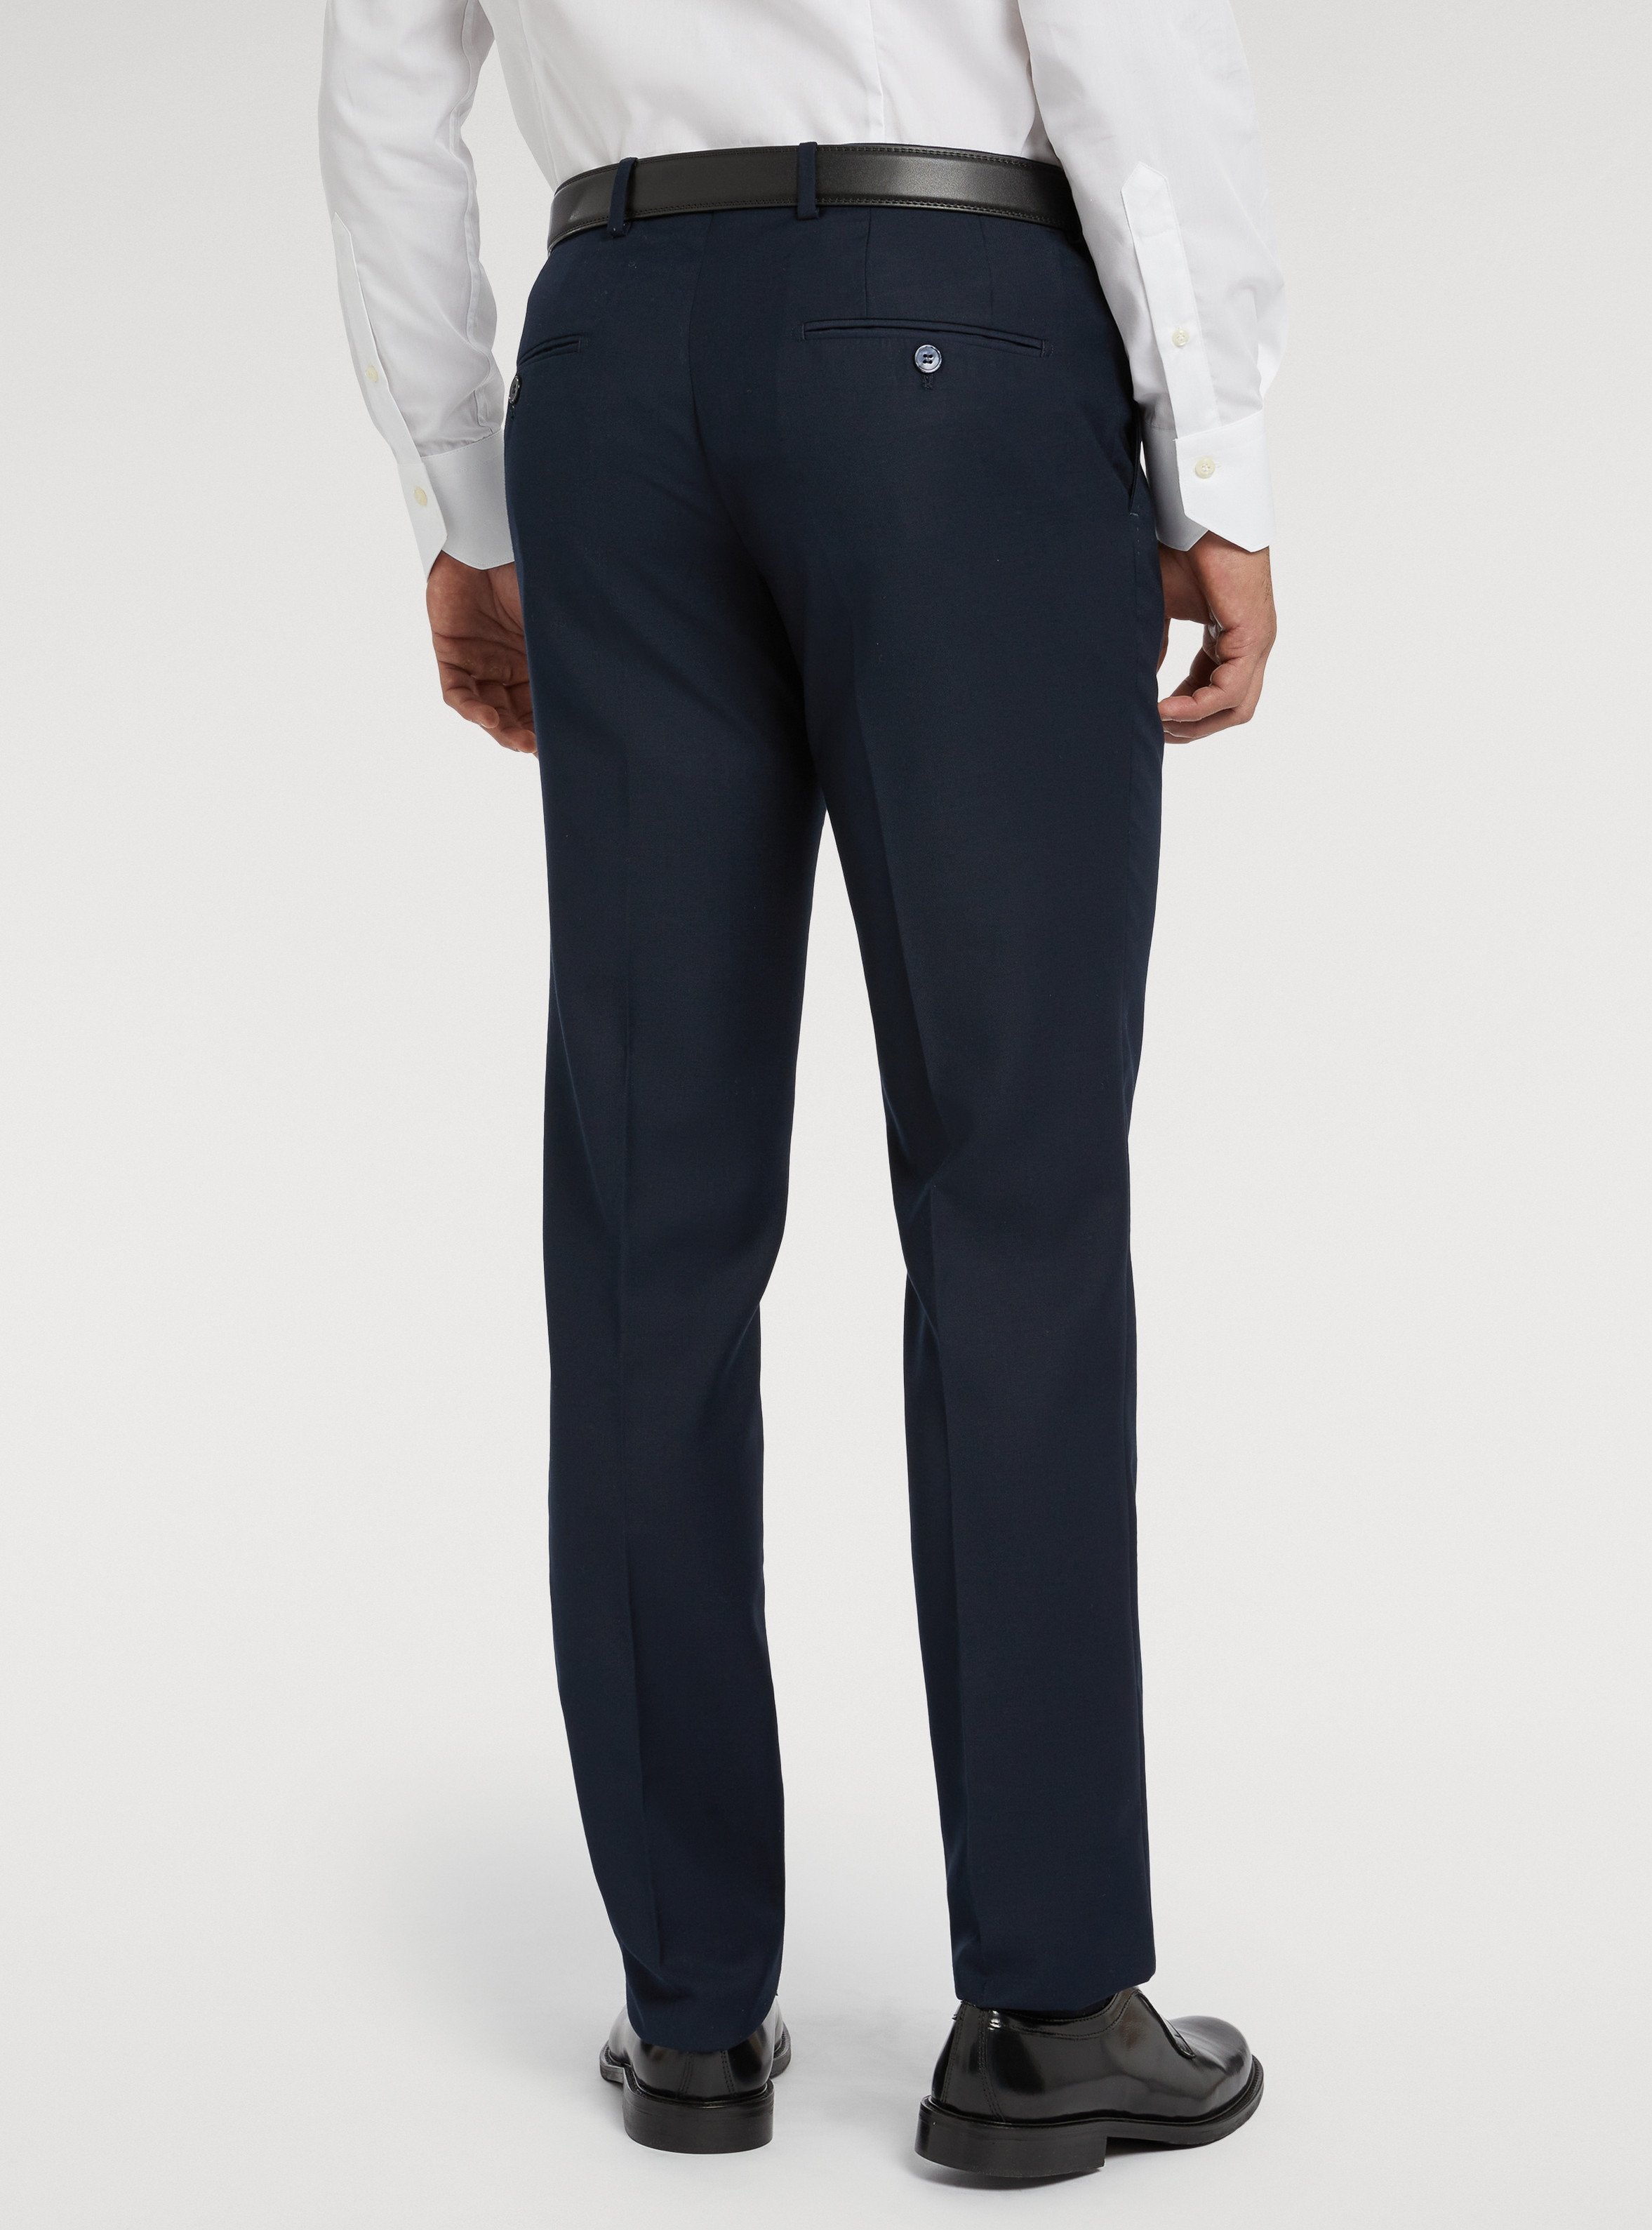 Tall Men's Mid Grey Suit Trousers